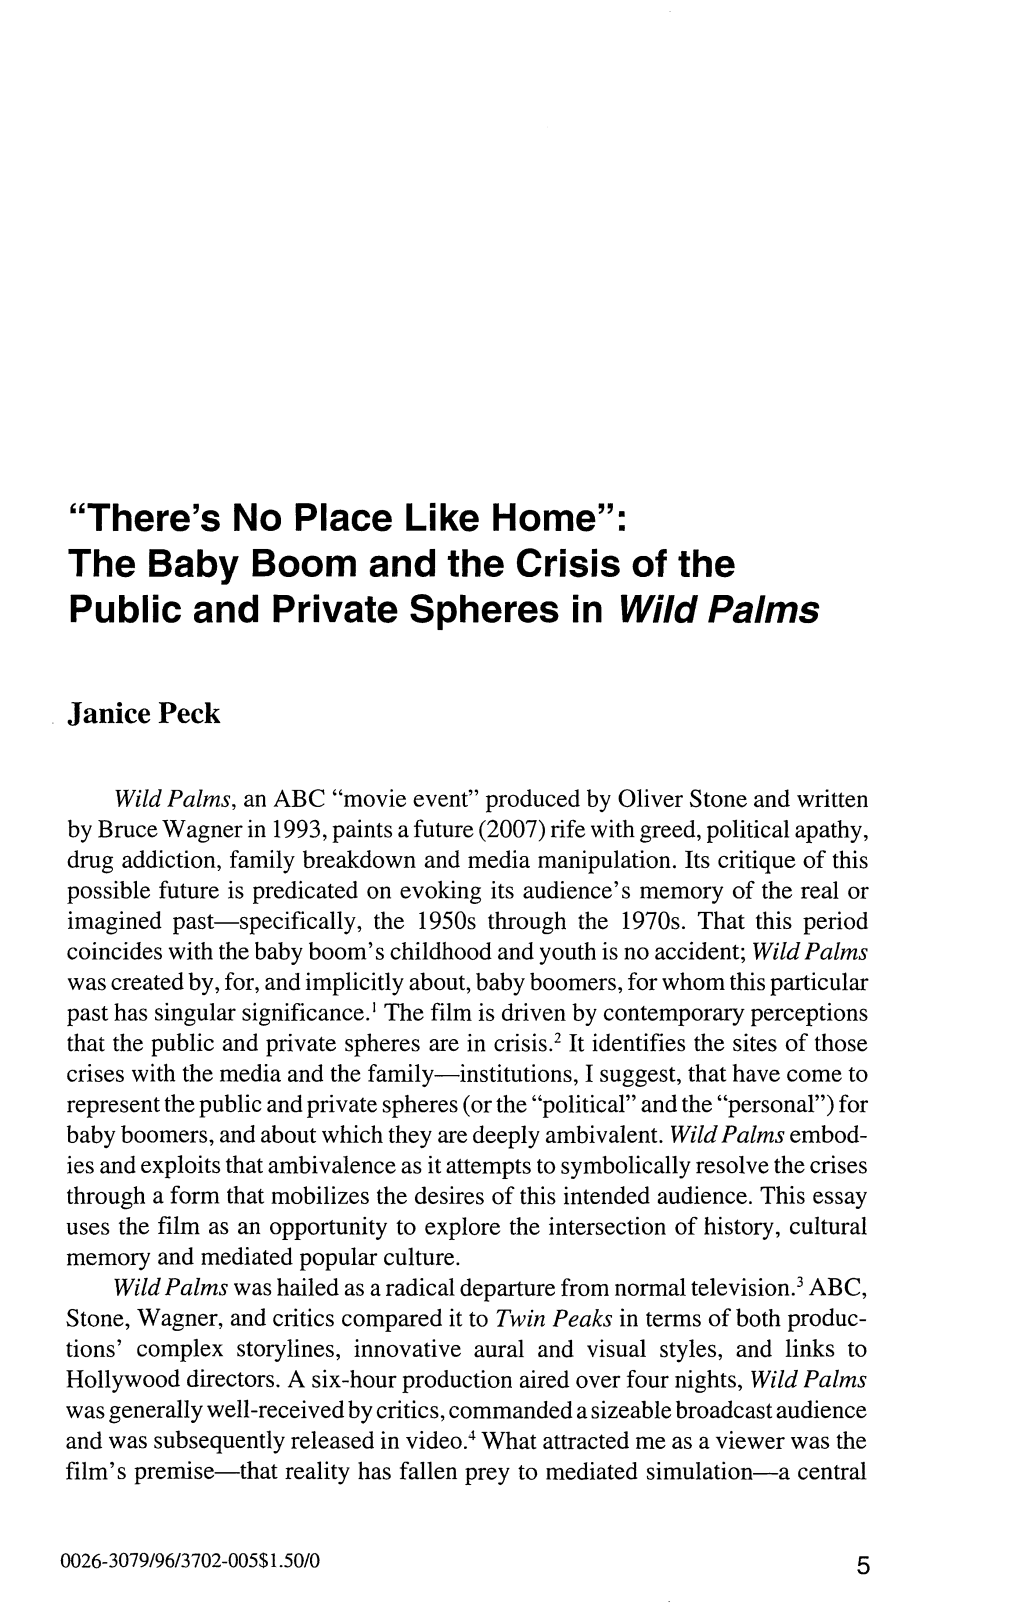 "There's No Place Like Home": the Baby Boom and the Crisis of the Public and Private Spheres in Wild Palms